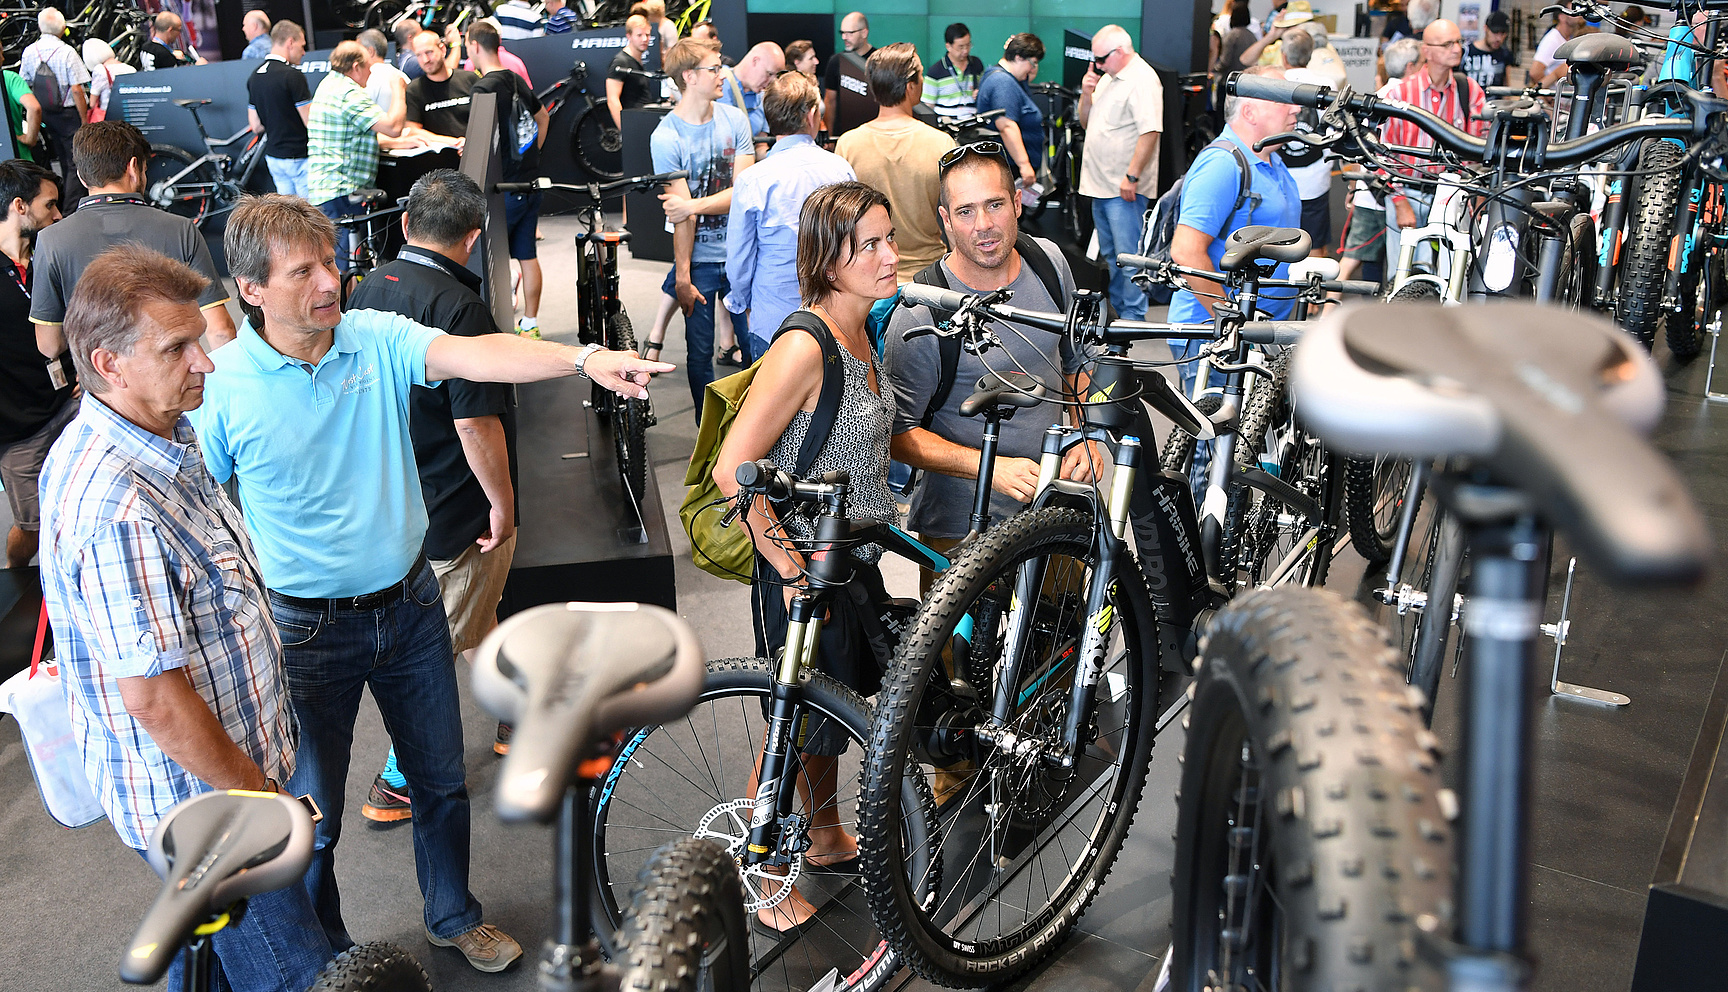 We love bicyclesSince decades EUROBIKE is the global platform for the cycling industry, allowing exchange on the latest trends.